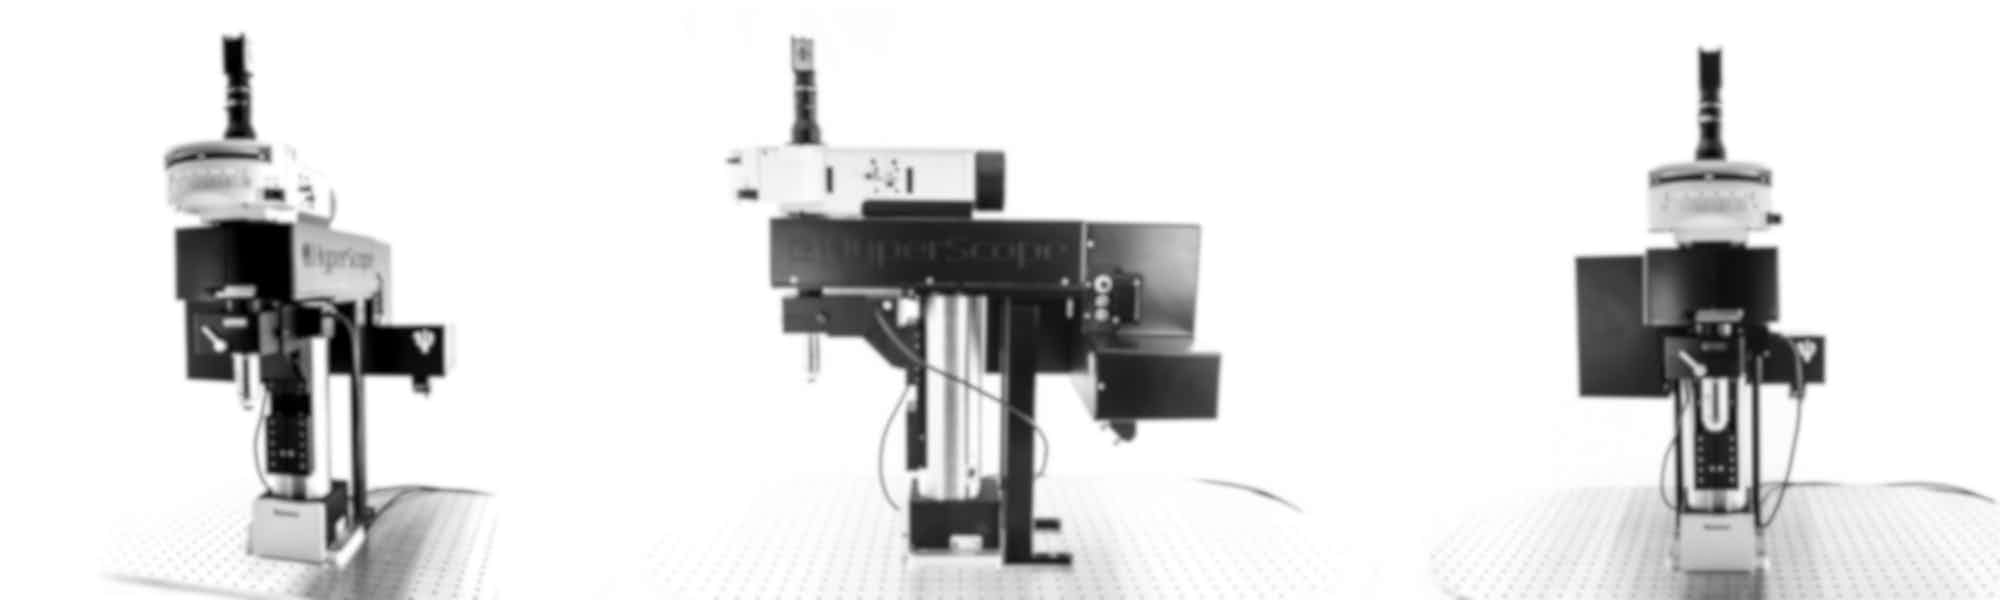 Scientifica multiphoton imaging products